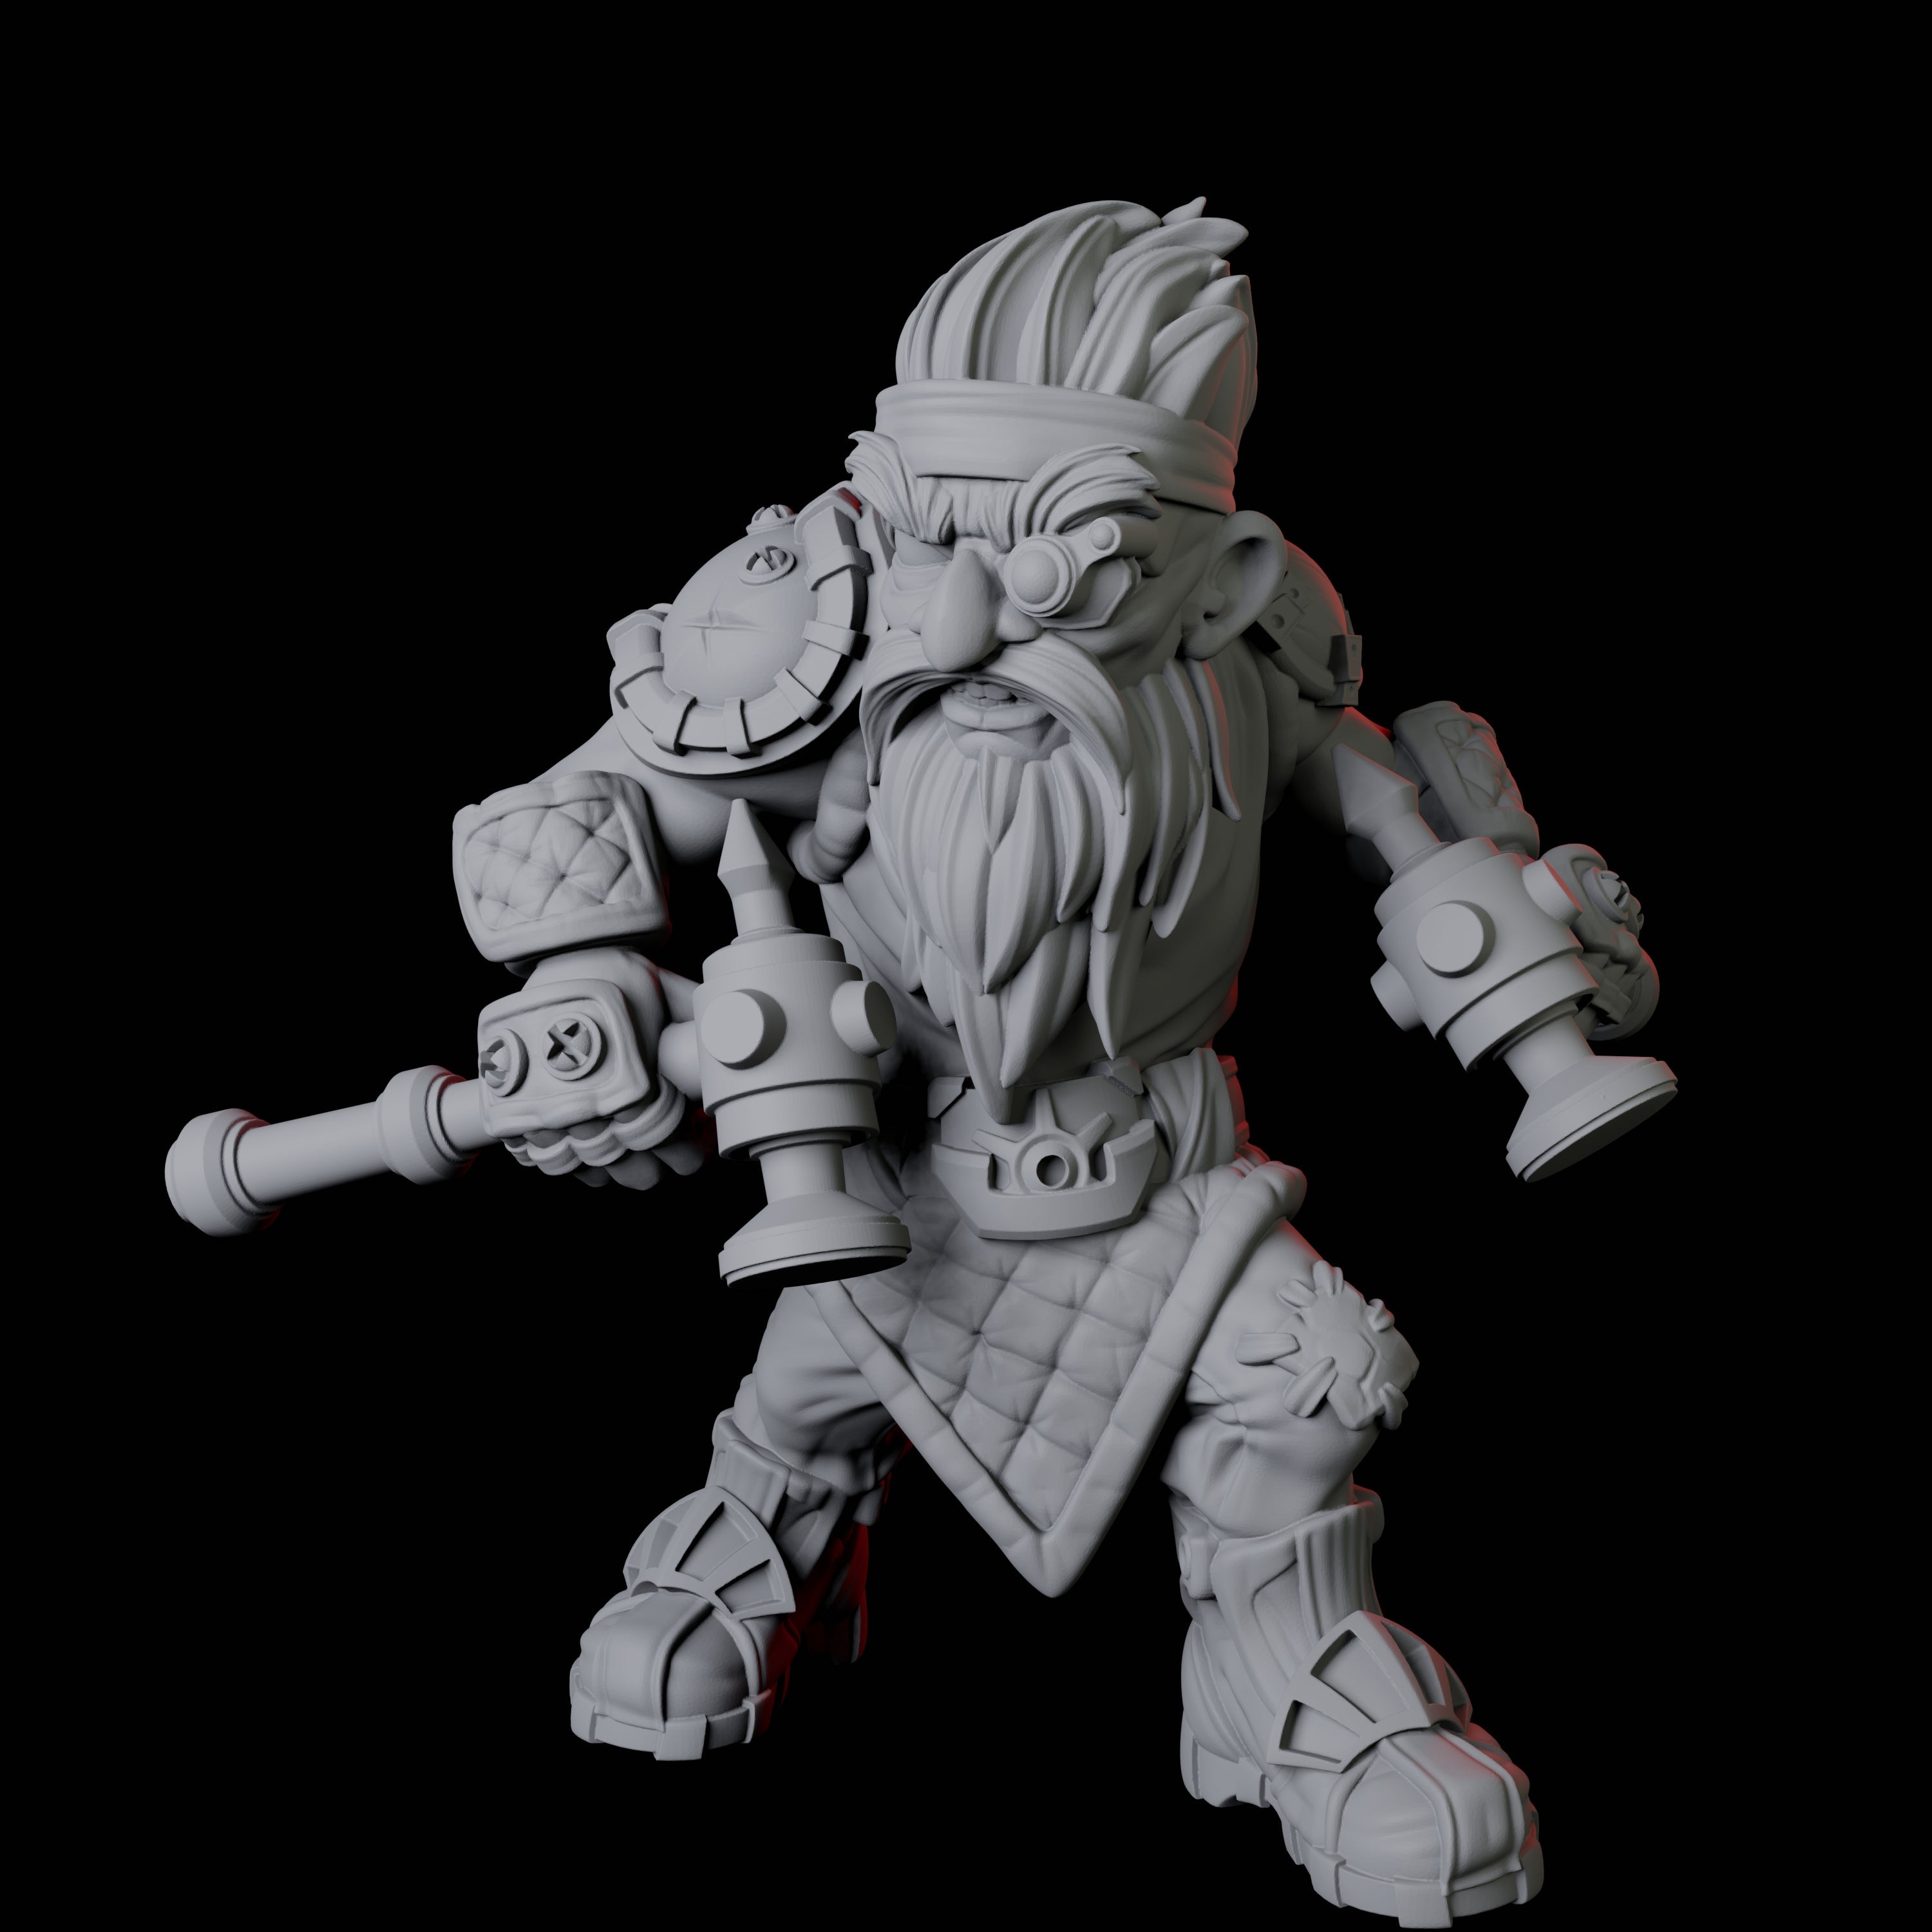 Gnome Artificer B Miniature for Dungeons and Dragons, Pathfinder or other TTRPGs